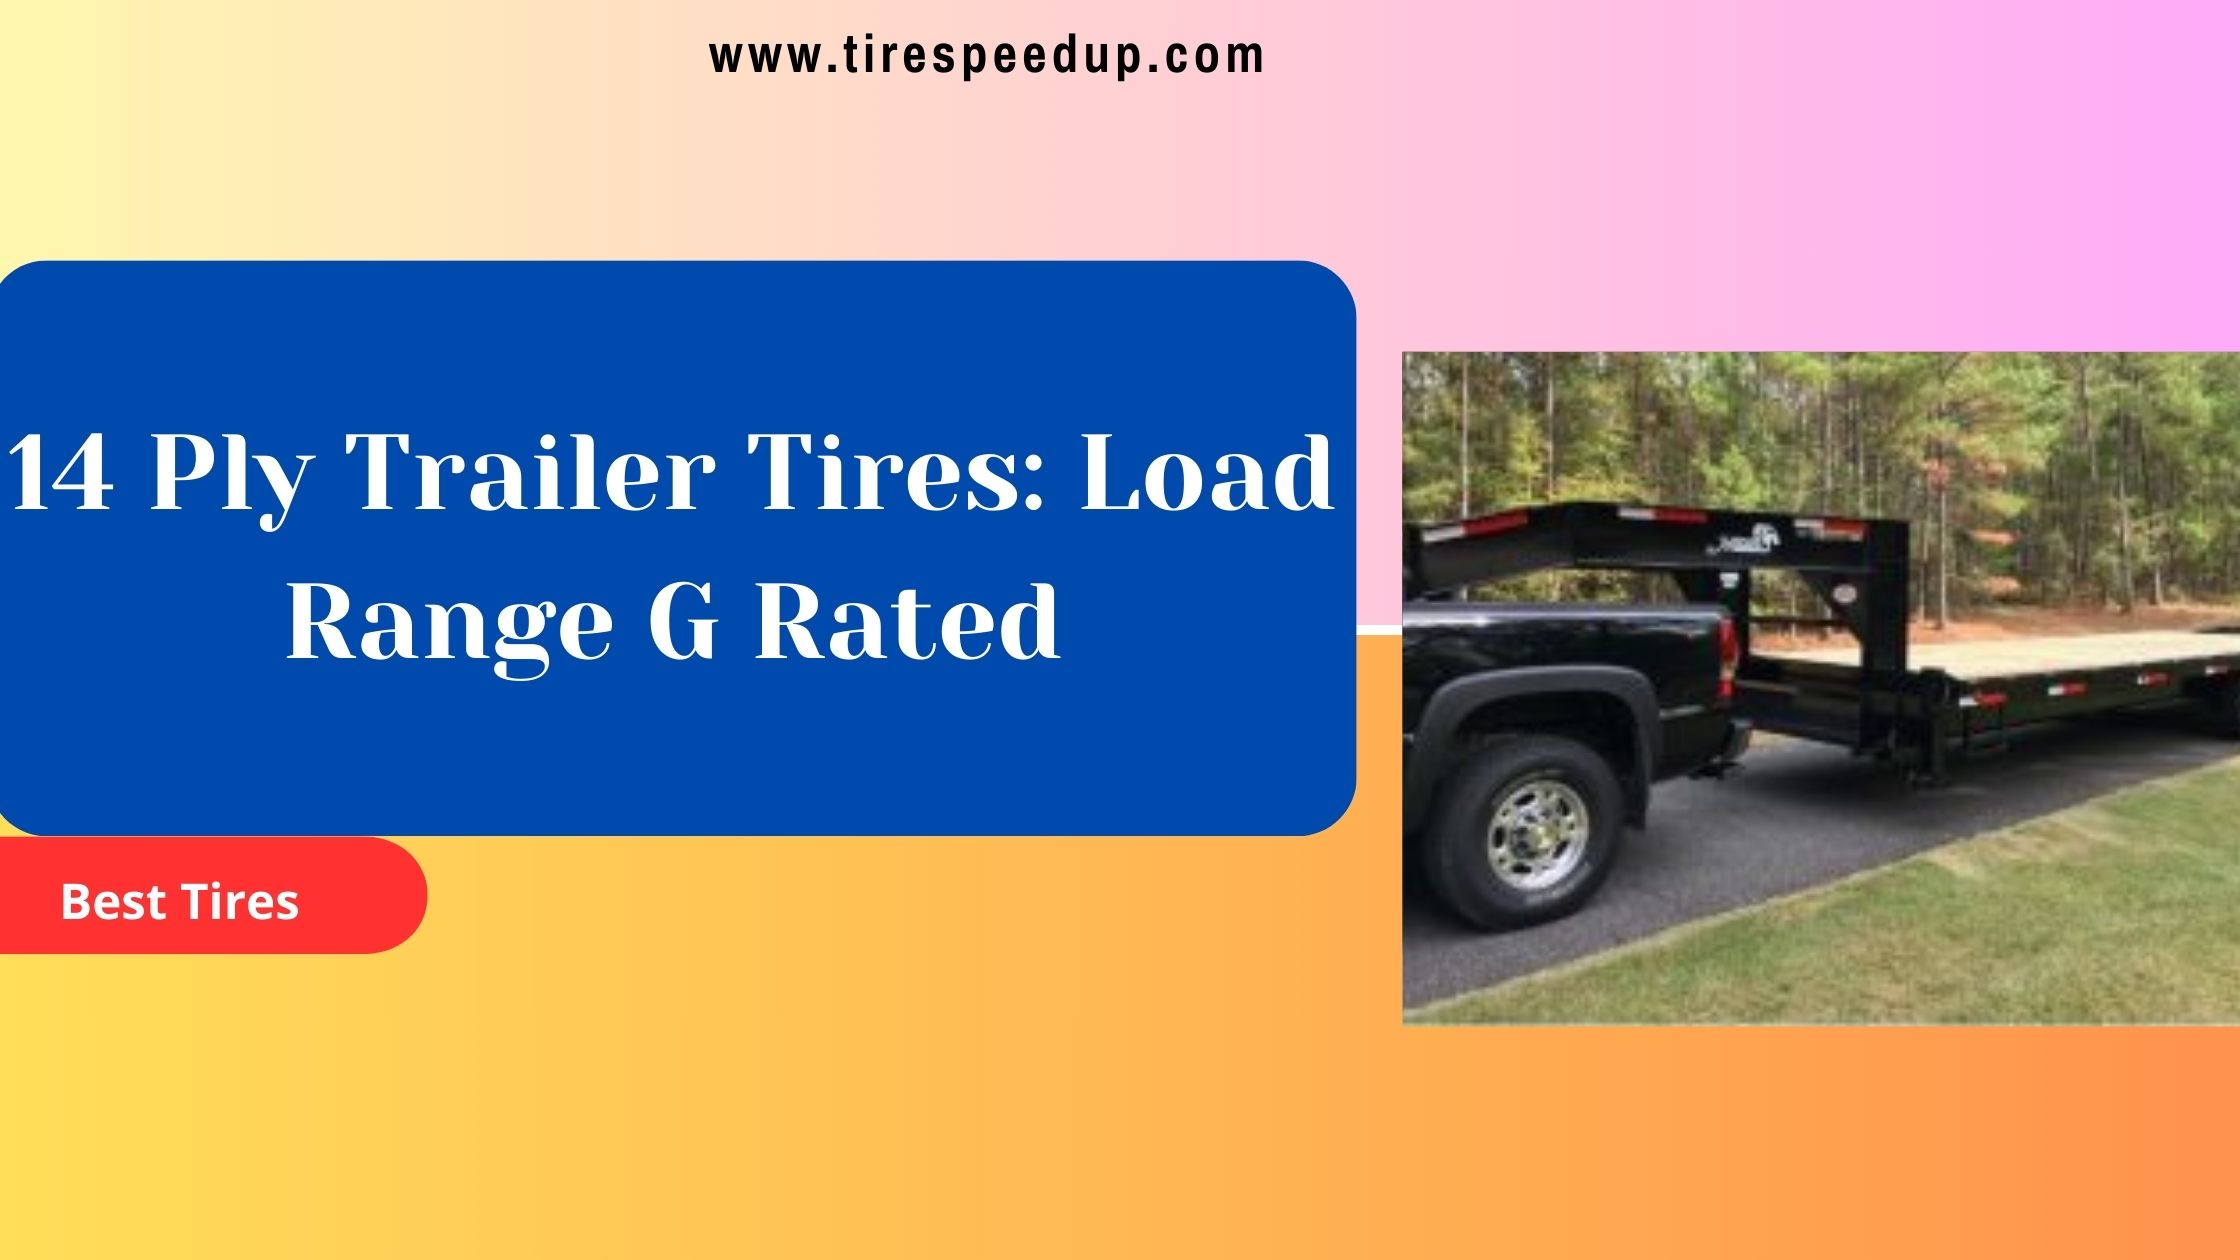 14 Ply Trailer Tires Load Range G Rated